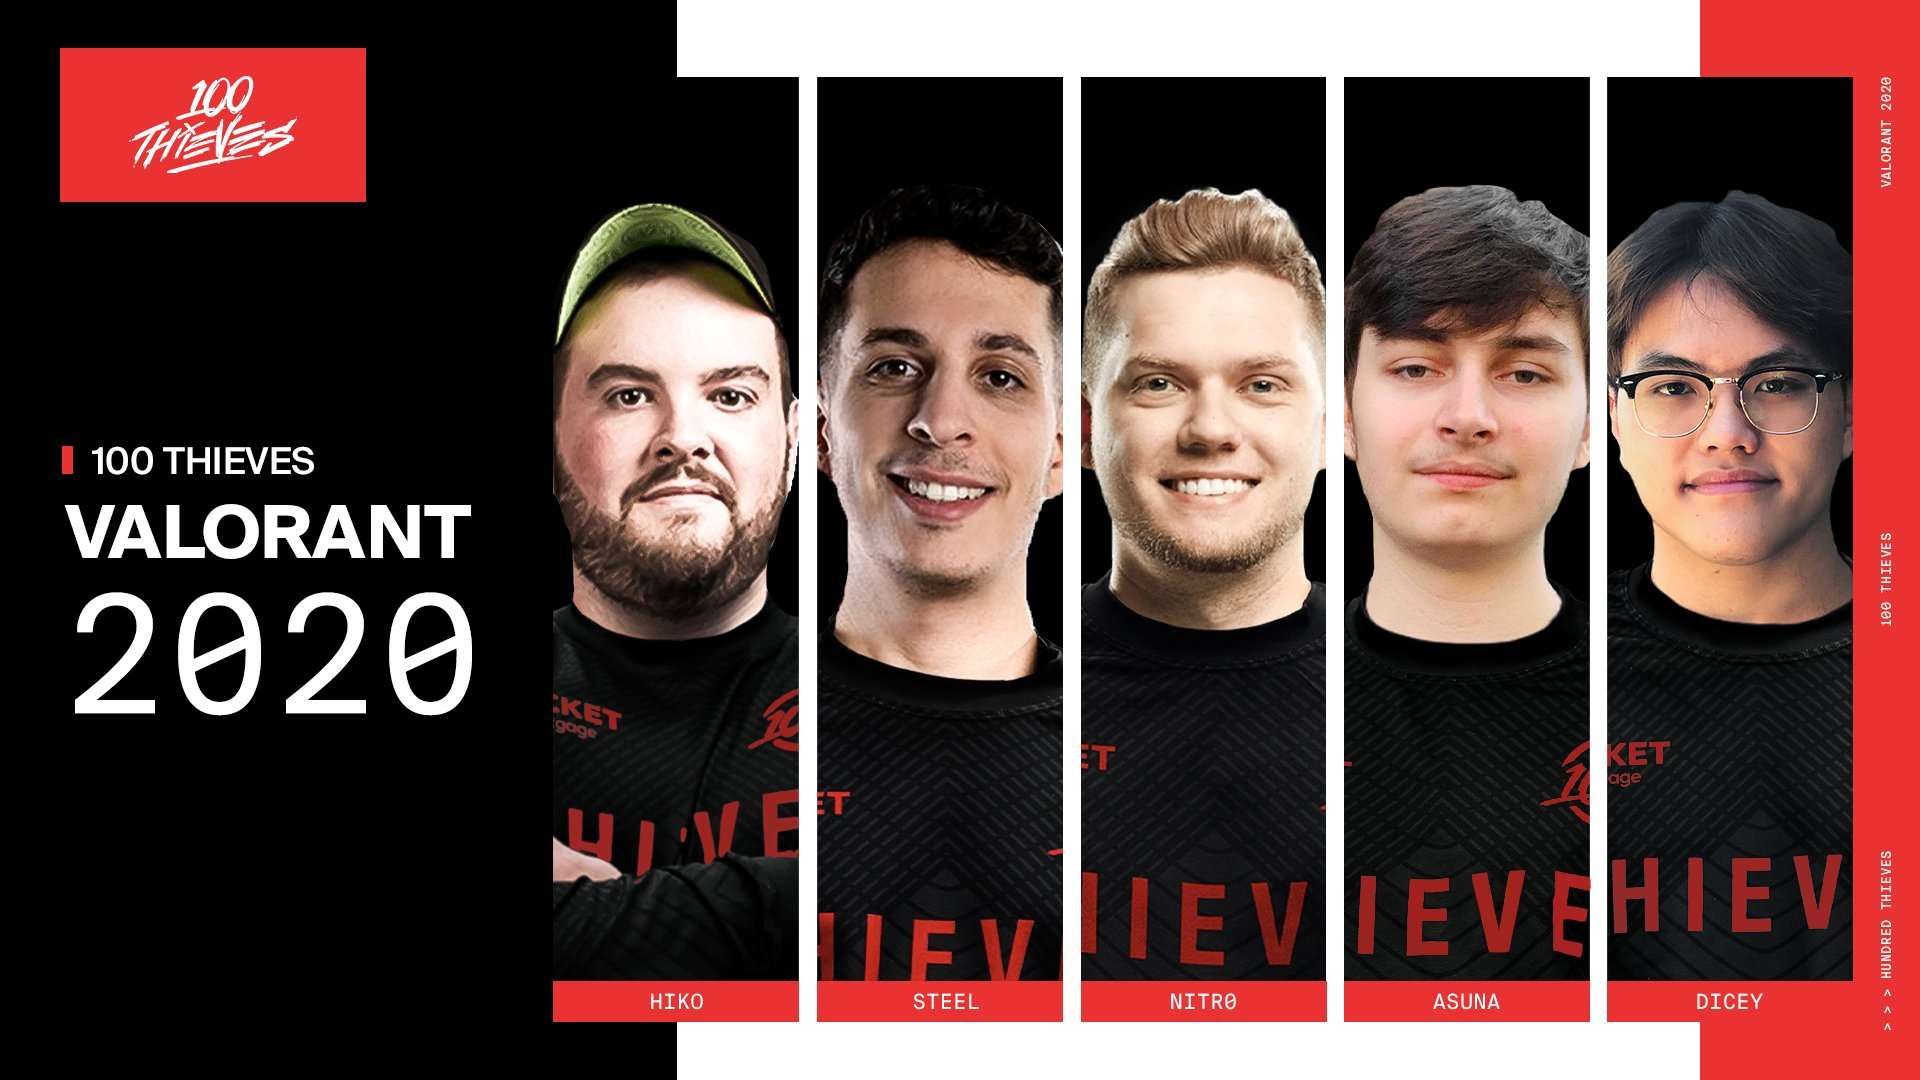 100 Thieves Valorant roster of Hiko, Steel, nitr0, Asuna, and Dicey